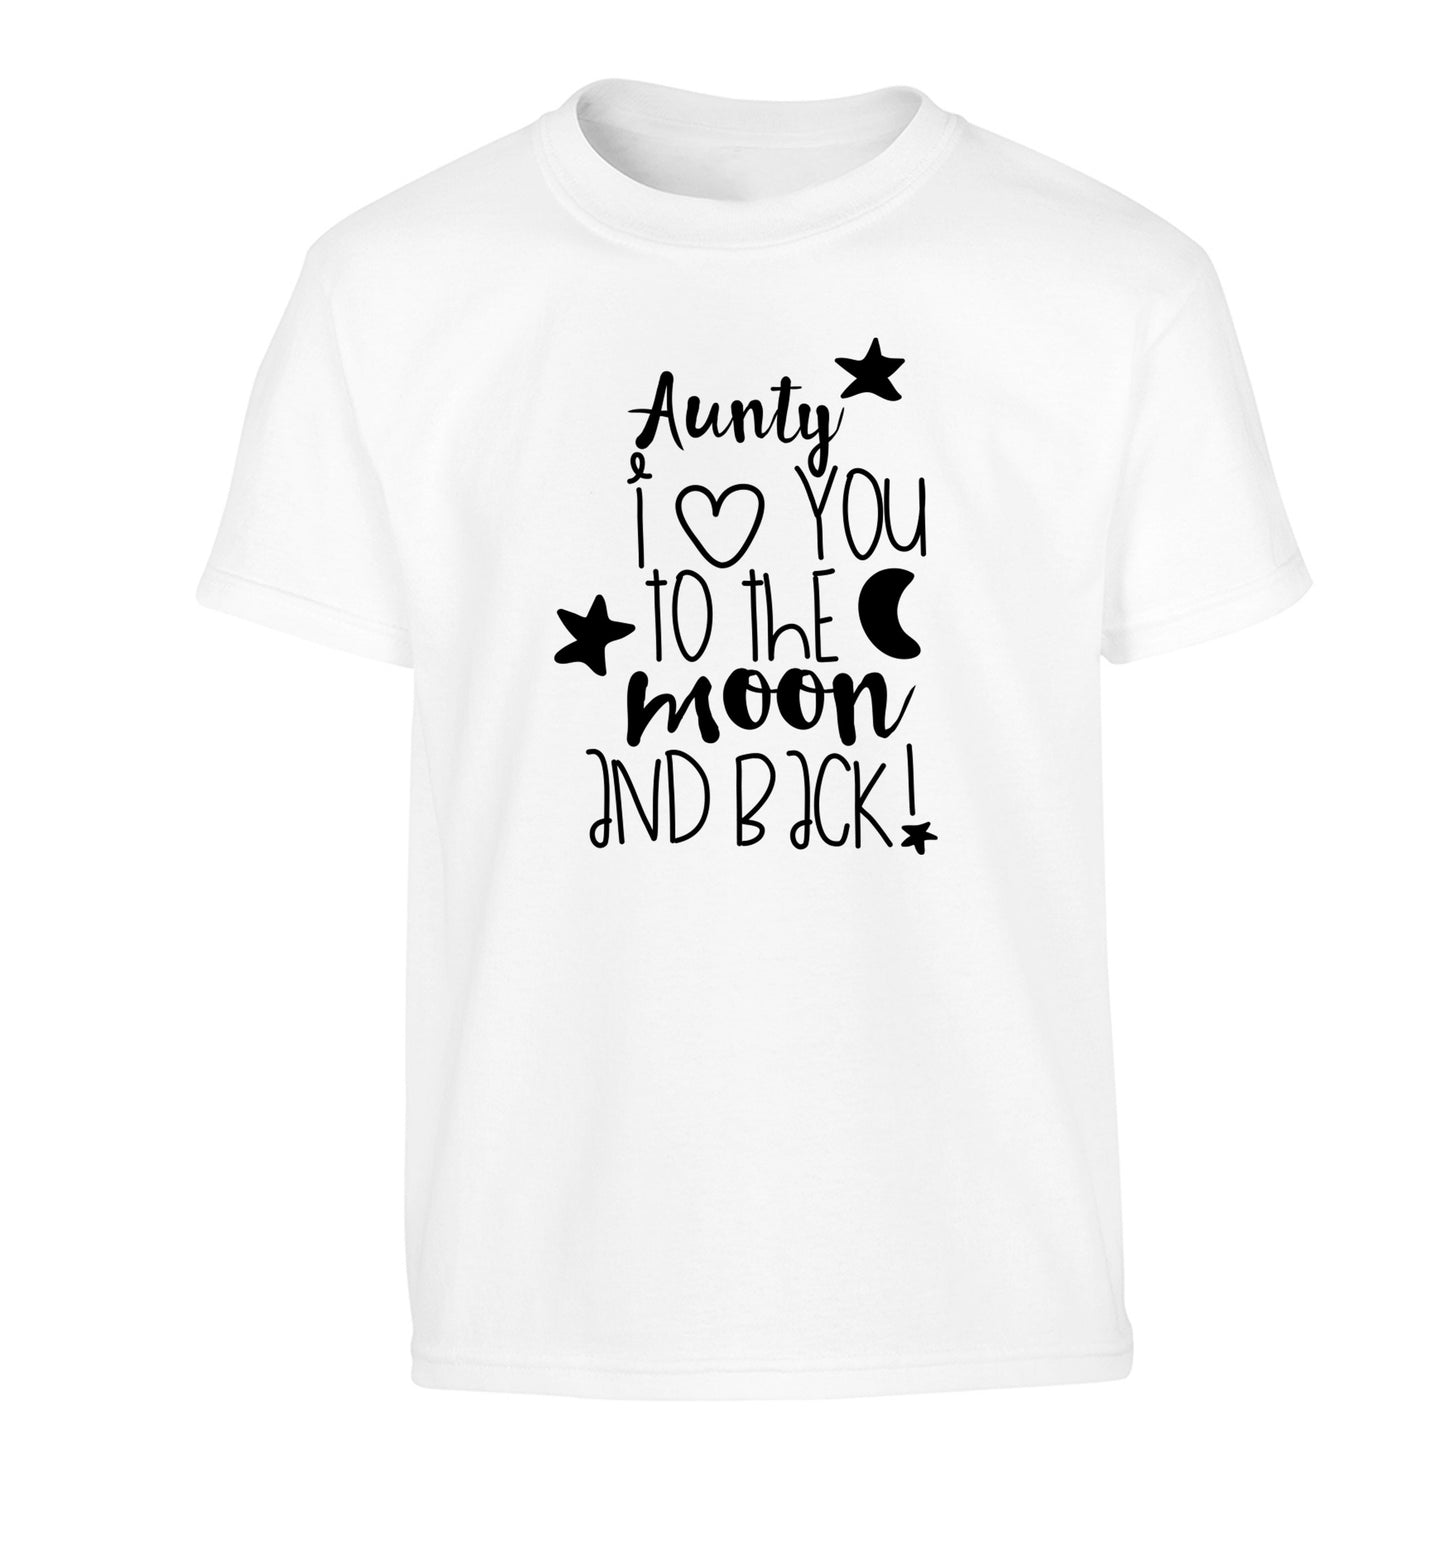 Aunty I love you to the moon and back Children's white Tshirt 12-14 Years